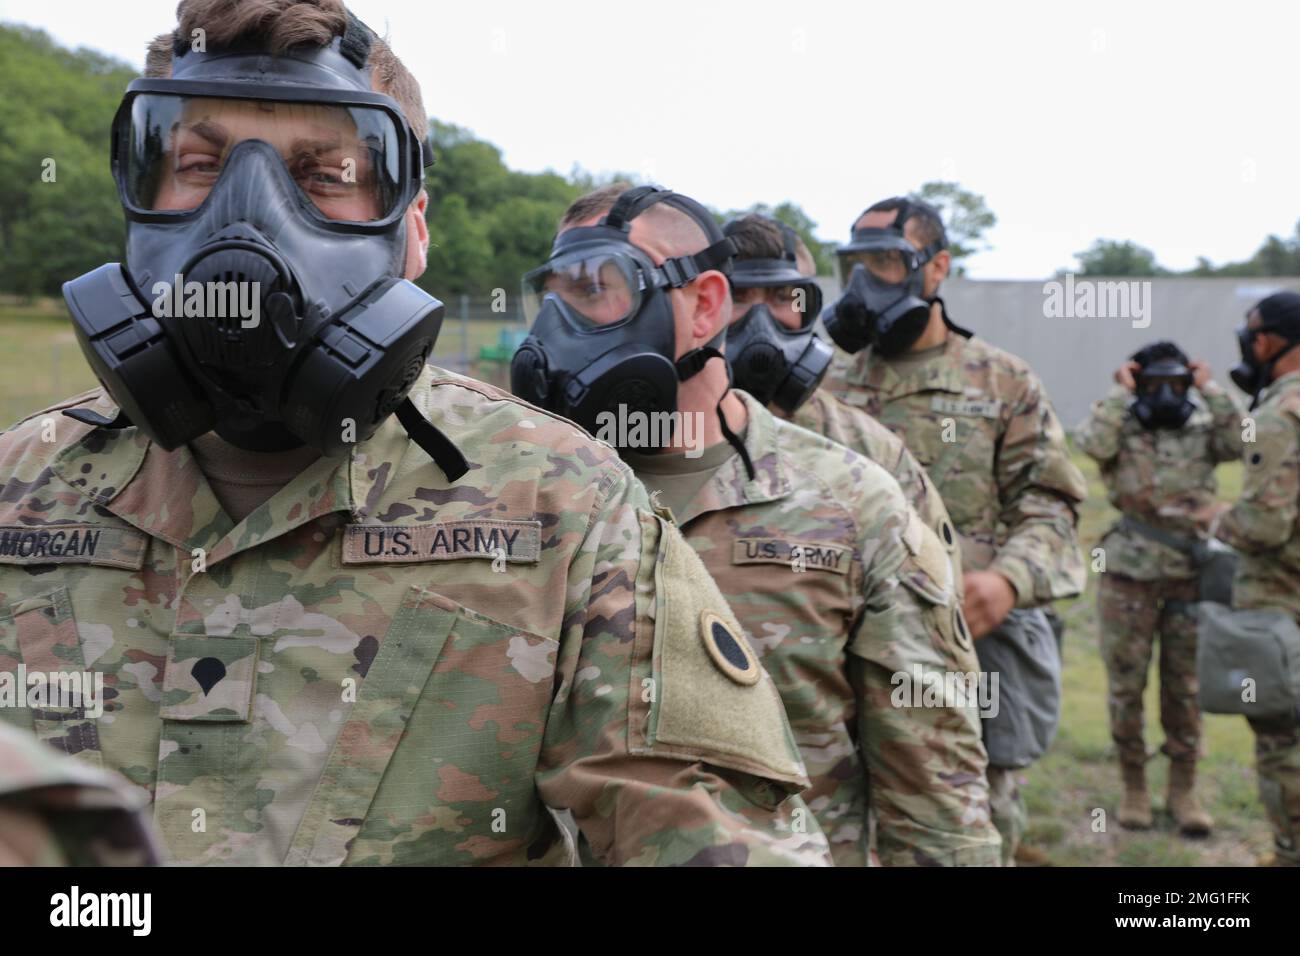 U.S. Army Spc. Joshua Morgan, an intelligence analyst assigned to the 37th Infantry Brigade Combat Team, prepares for a Chemical, Biological, Radioactive and Nuclear (CBRN) training exercise to begin at Camp Grayling, Michigan, Aug. 20, 2022. The CBRN training required the Soldiers to be exposed to a mild and benign chemical irritant in order to build confidence in using their M50 Gas Mask. Stock Photo